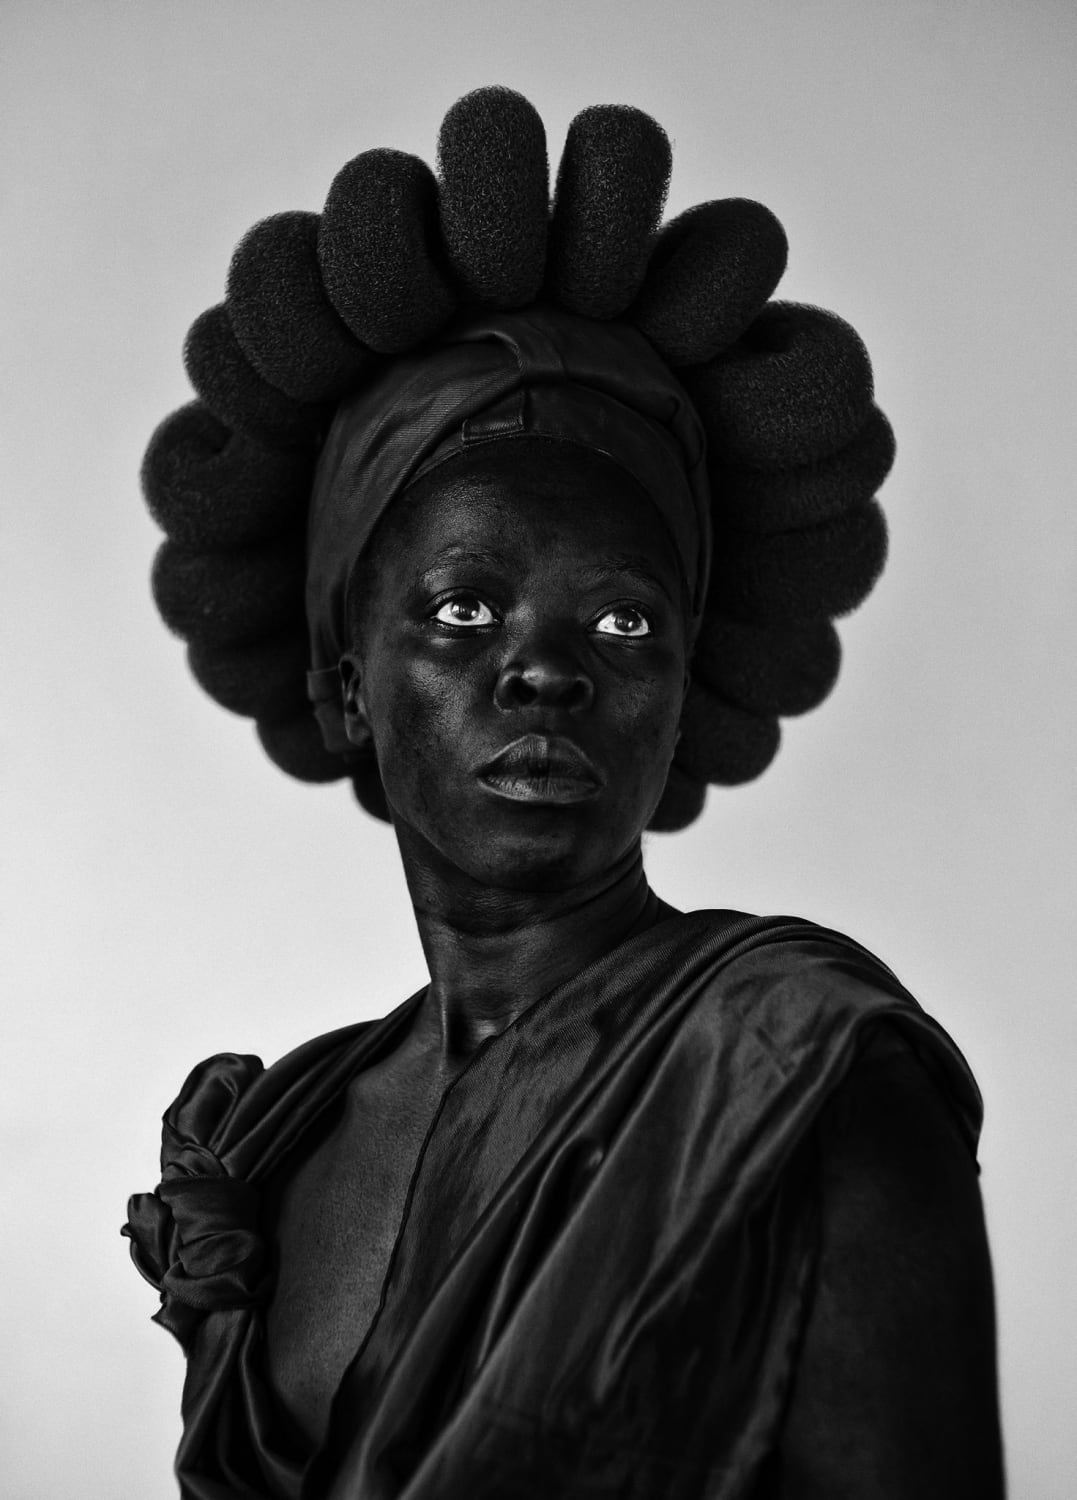 In April 2020, Tate Modern will open a major exhibition of ZaneleMuholi, staging the full breadth of the artist's powerful, activist work. Members see Muholi free. Gift a Tate membership here: